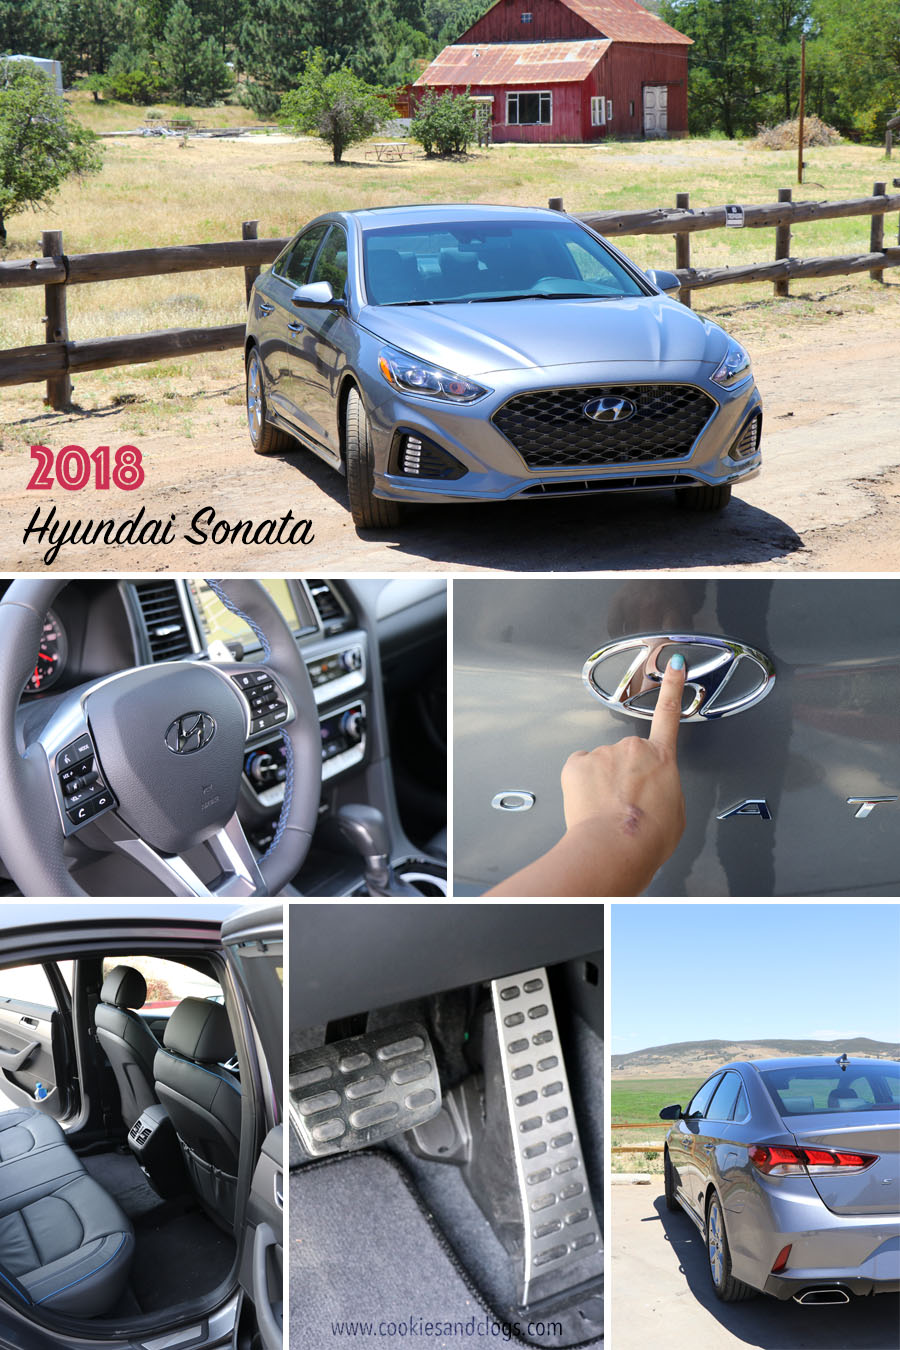 Cookies & Clogs | Giving back to the La Jolla, CA and San Diego, CA community +  2018 Hyundai Sonata review.